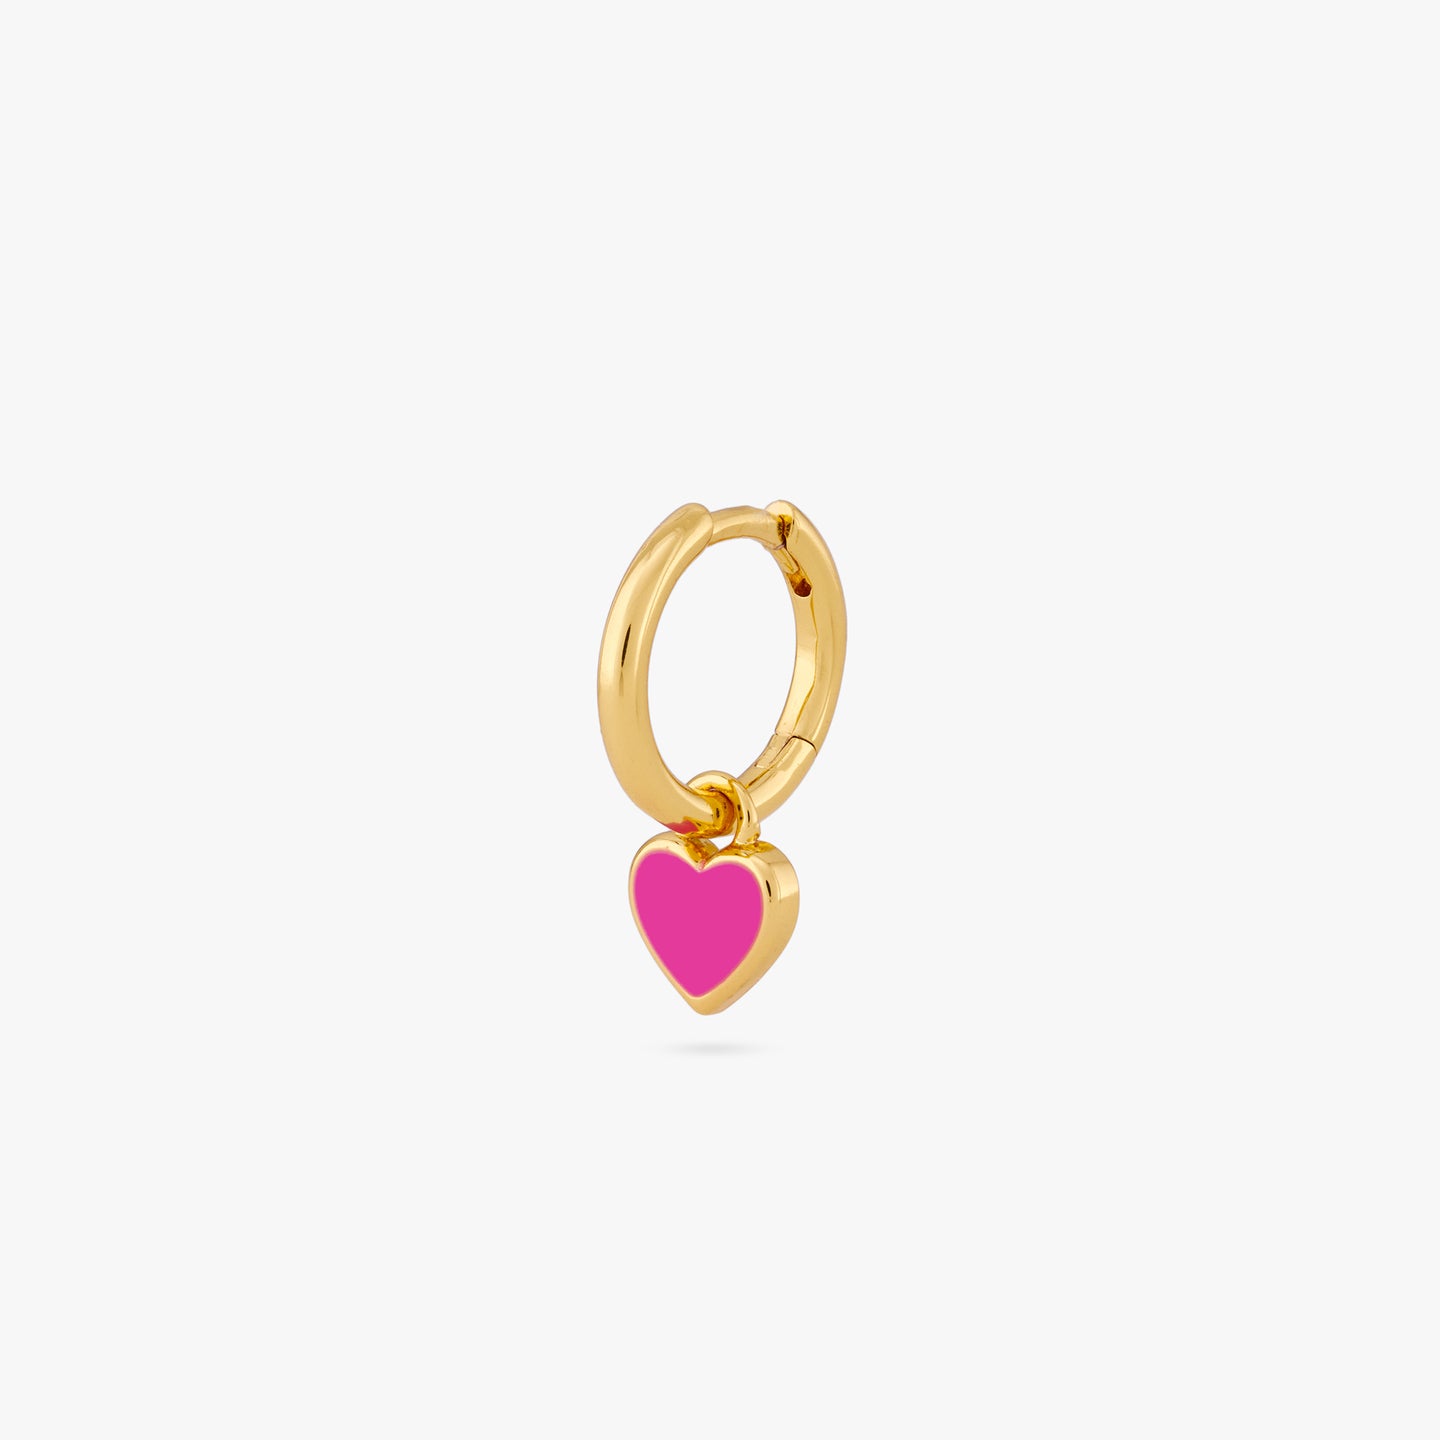 A gold huggie with a pink enamel heart shaped charm color:null|gold